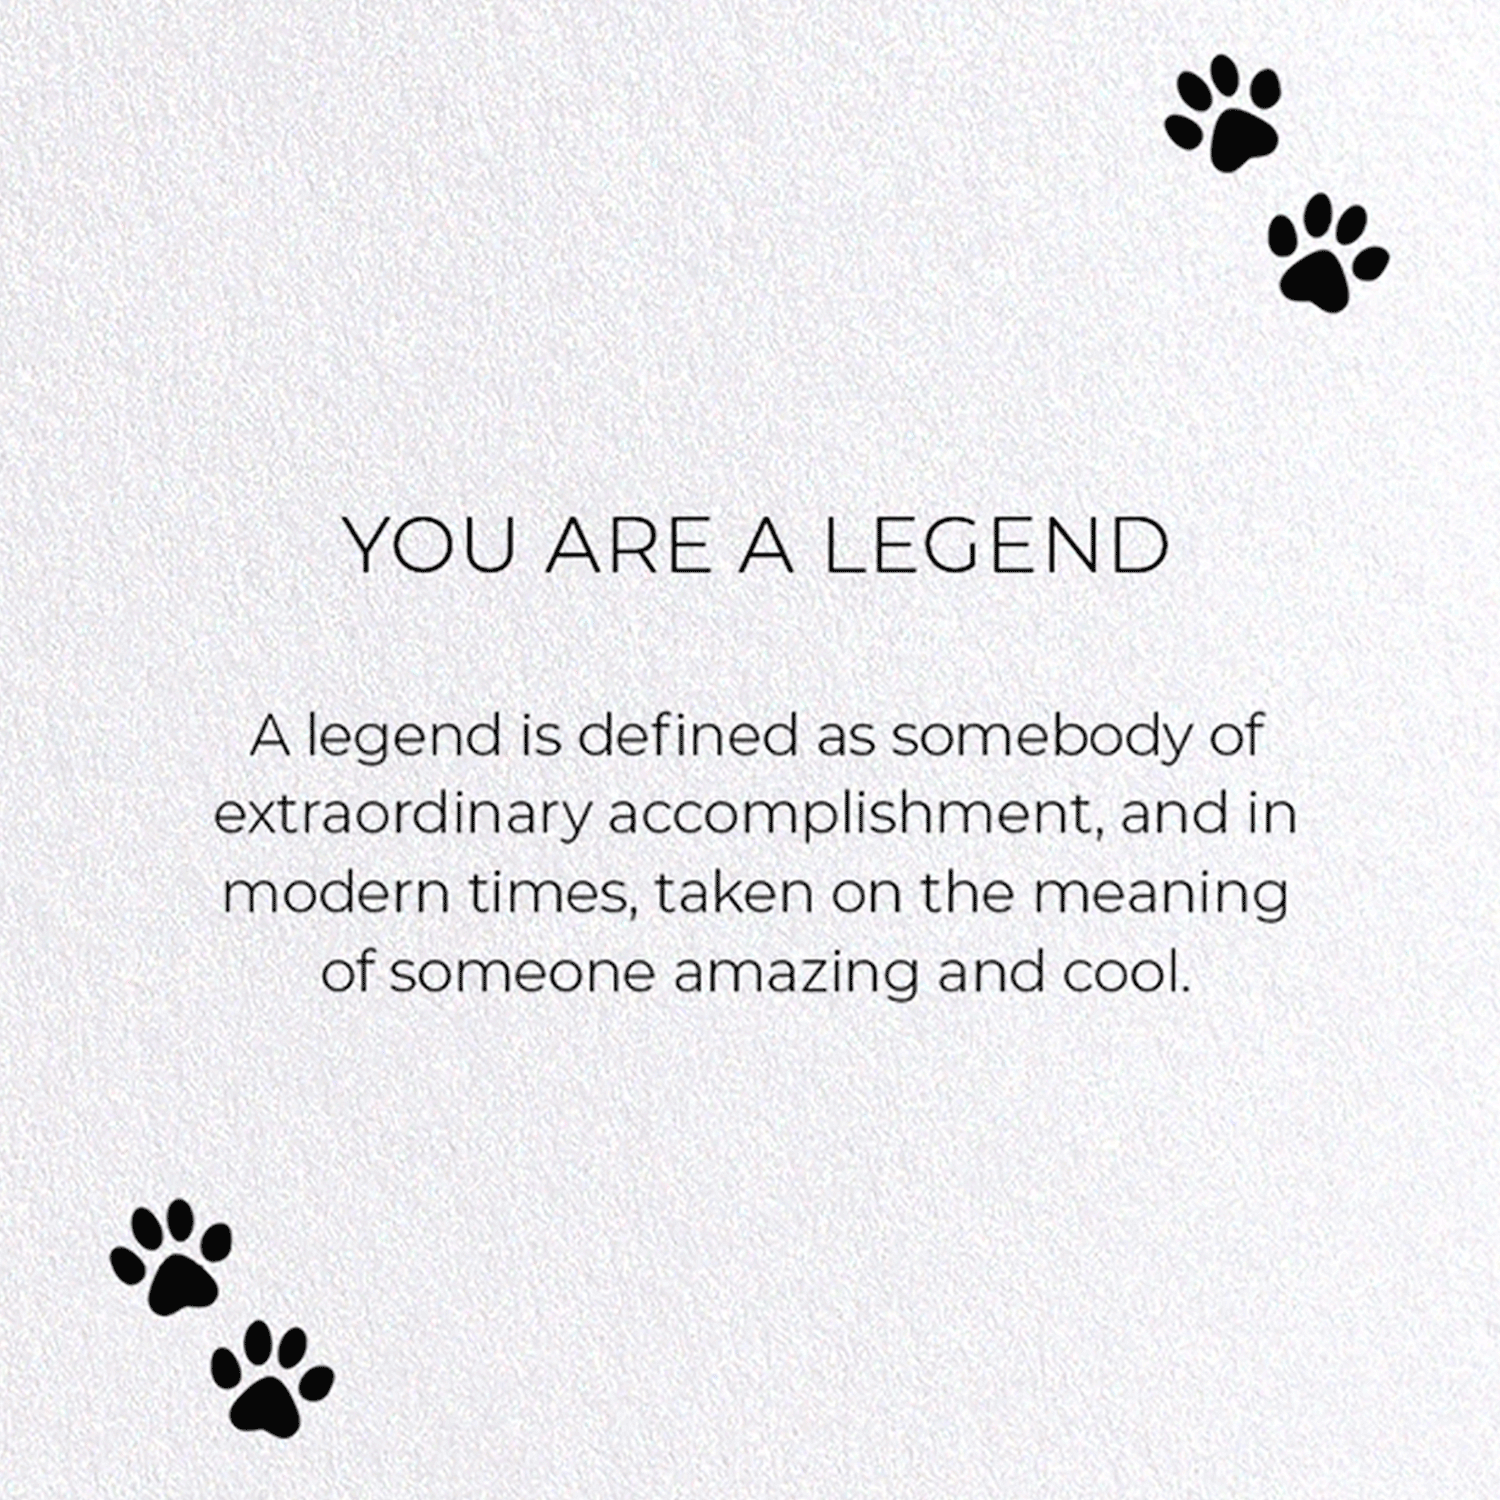 YOU ARE A LEGEND: Funny Animal Greeting Card